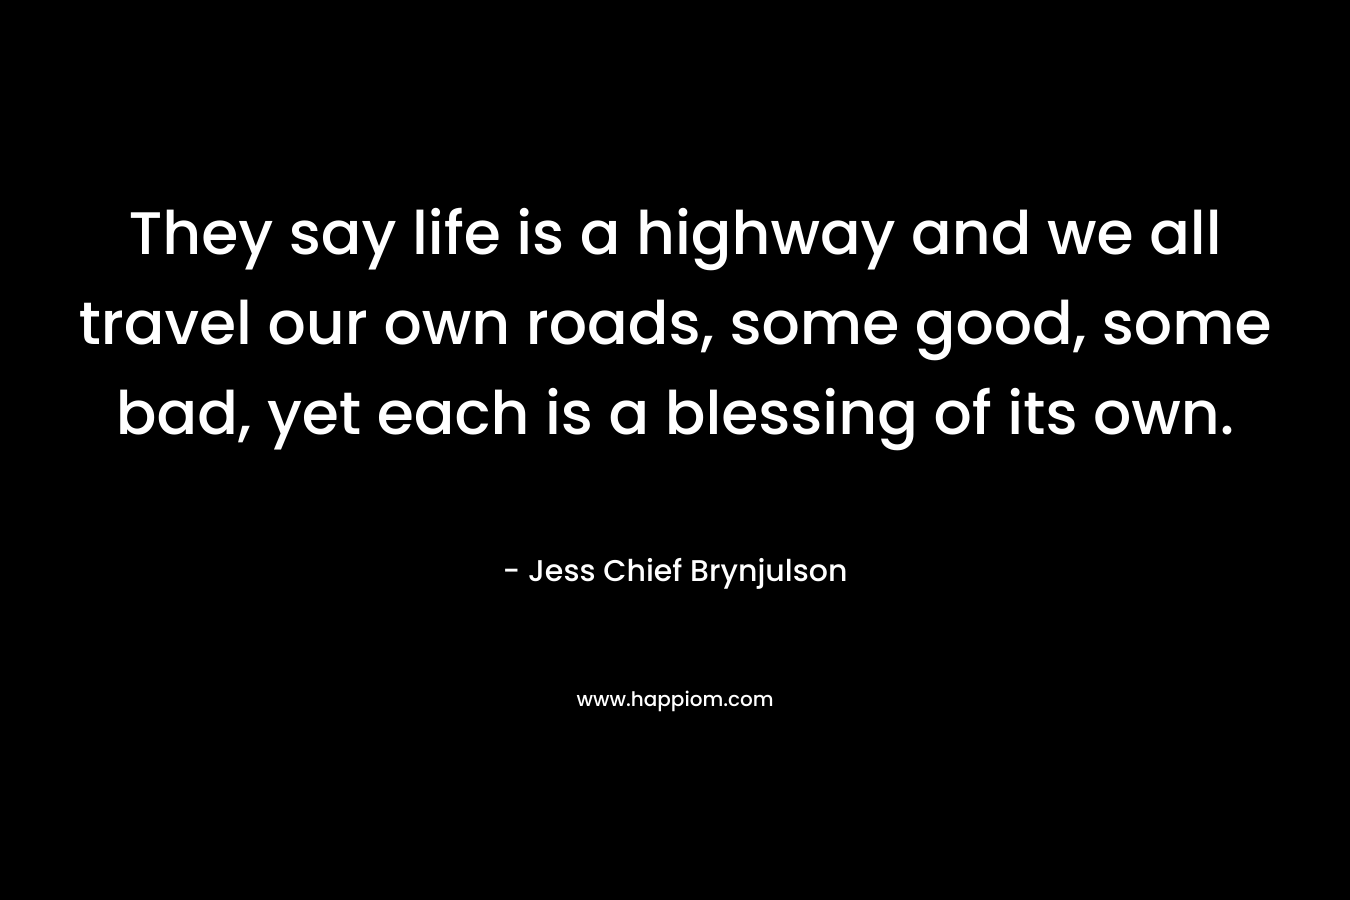 They say life is a highway and we all travel our own roads, some good, some bad, yet each is a blessing of its own. – Jess Chief Brynjulson